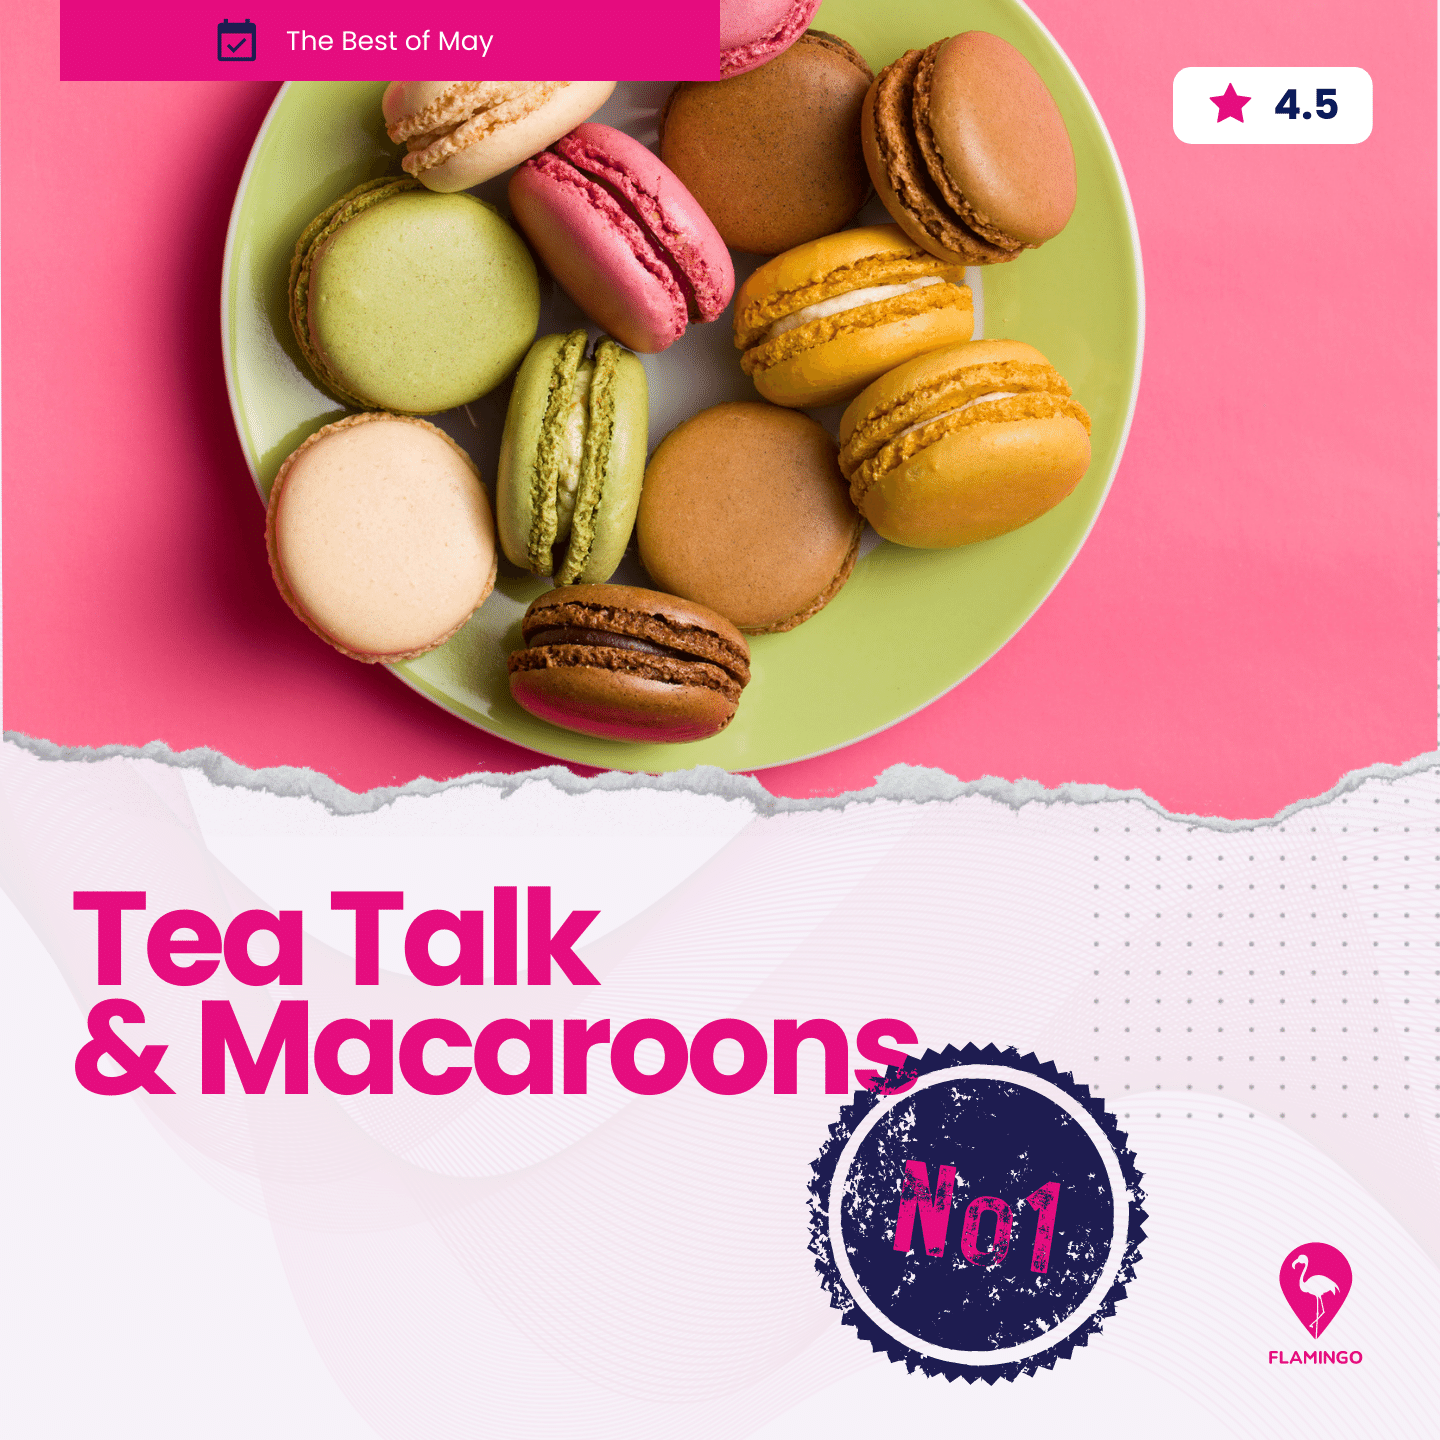 Tea Talk & Macaroons | Resident Event Ideas for May